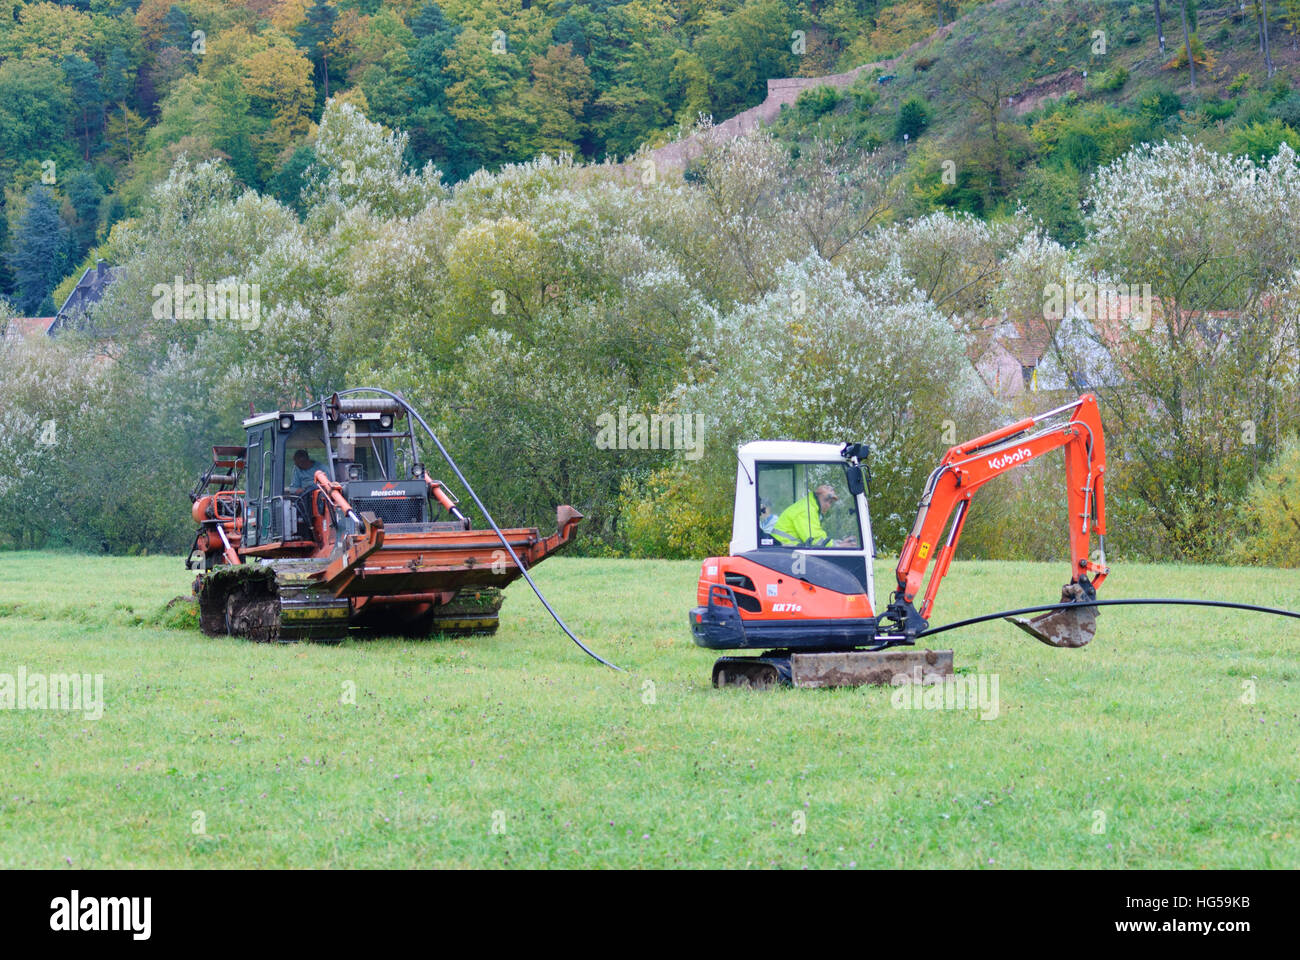 Freudenberg: Transfer of a Telekom cable by means of cable plough, Taubertal, Baden-Württemberg, Germany Stock Photo